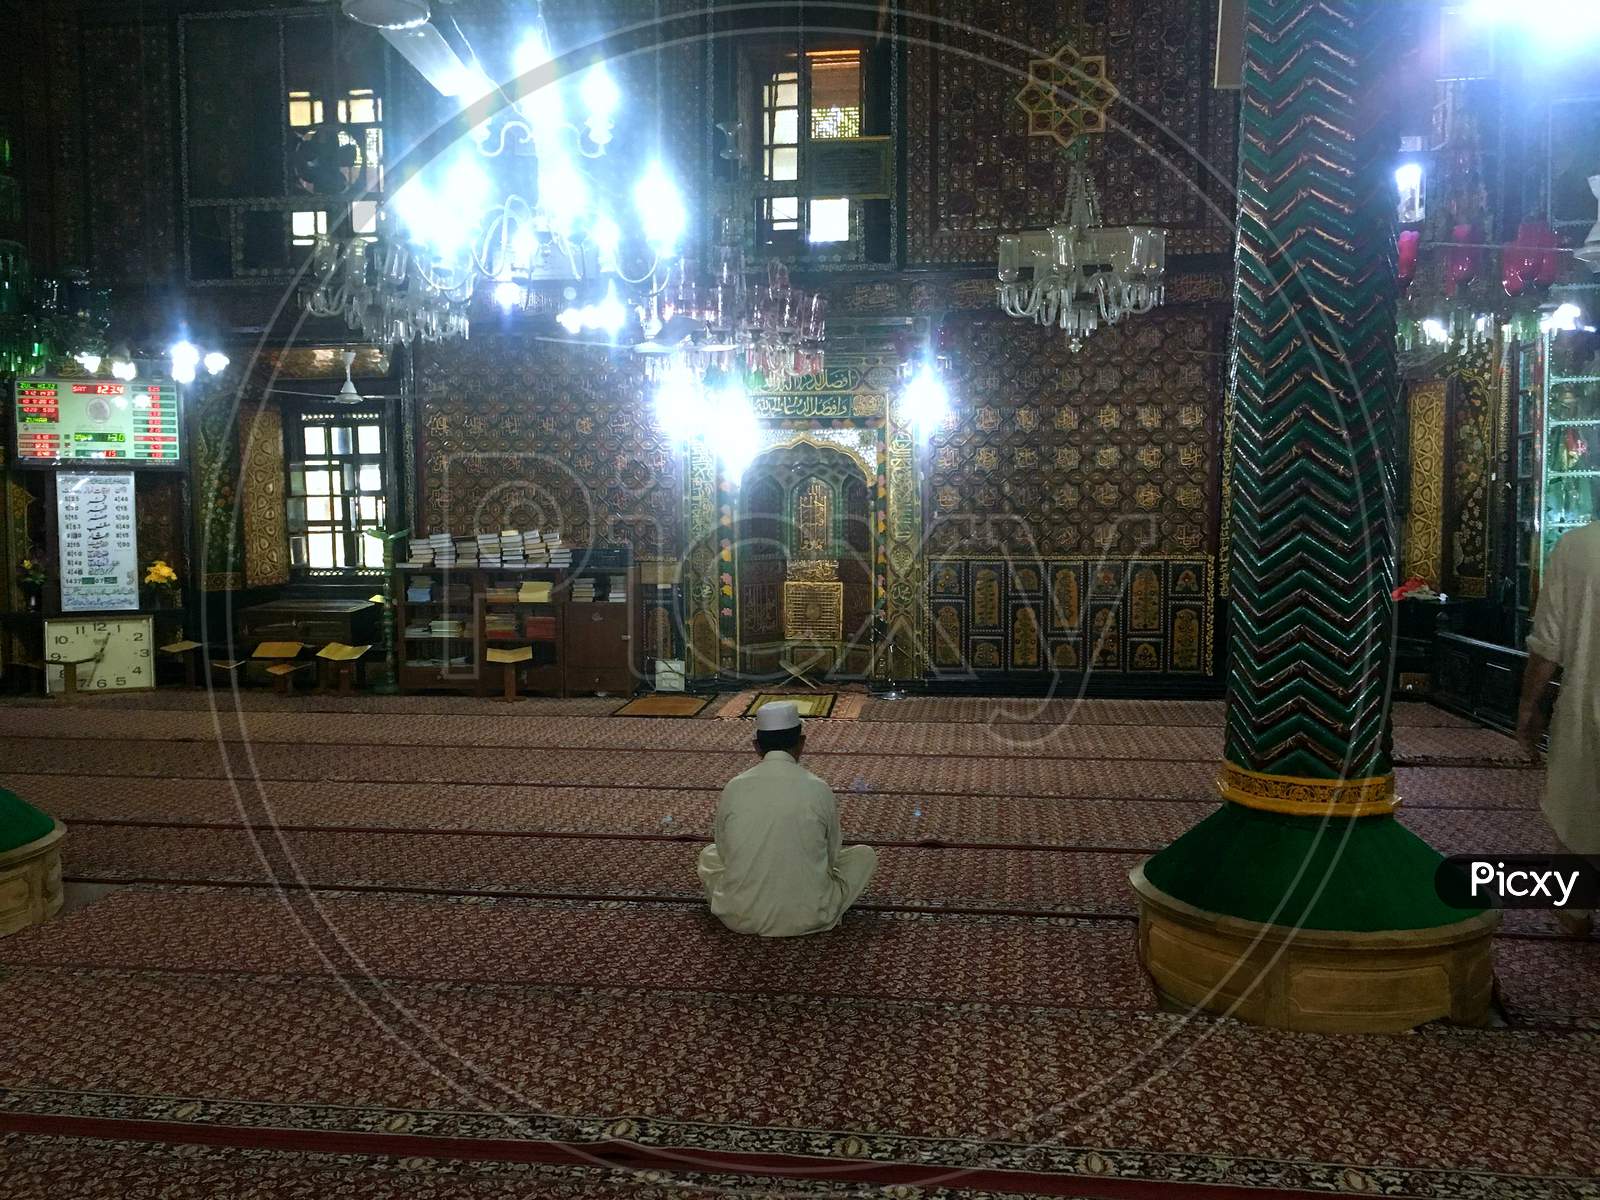 Masjid And A Man Prays In Old Downtown Area